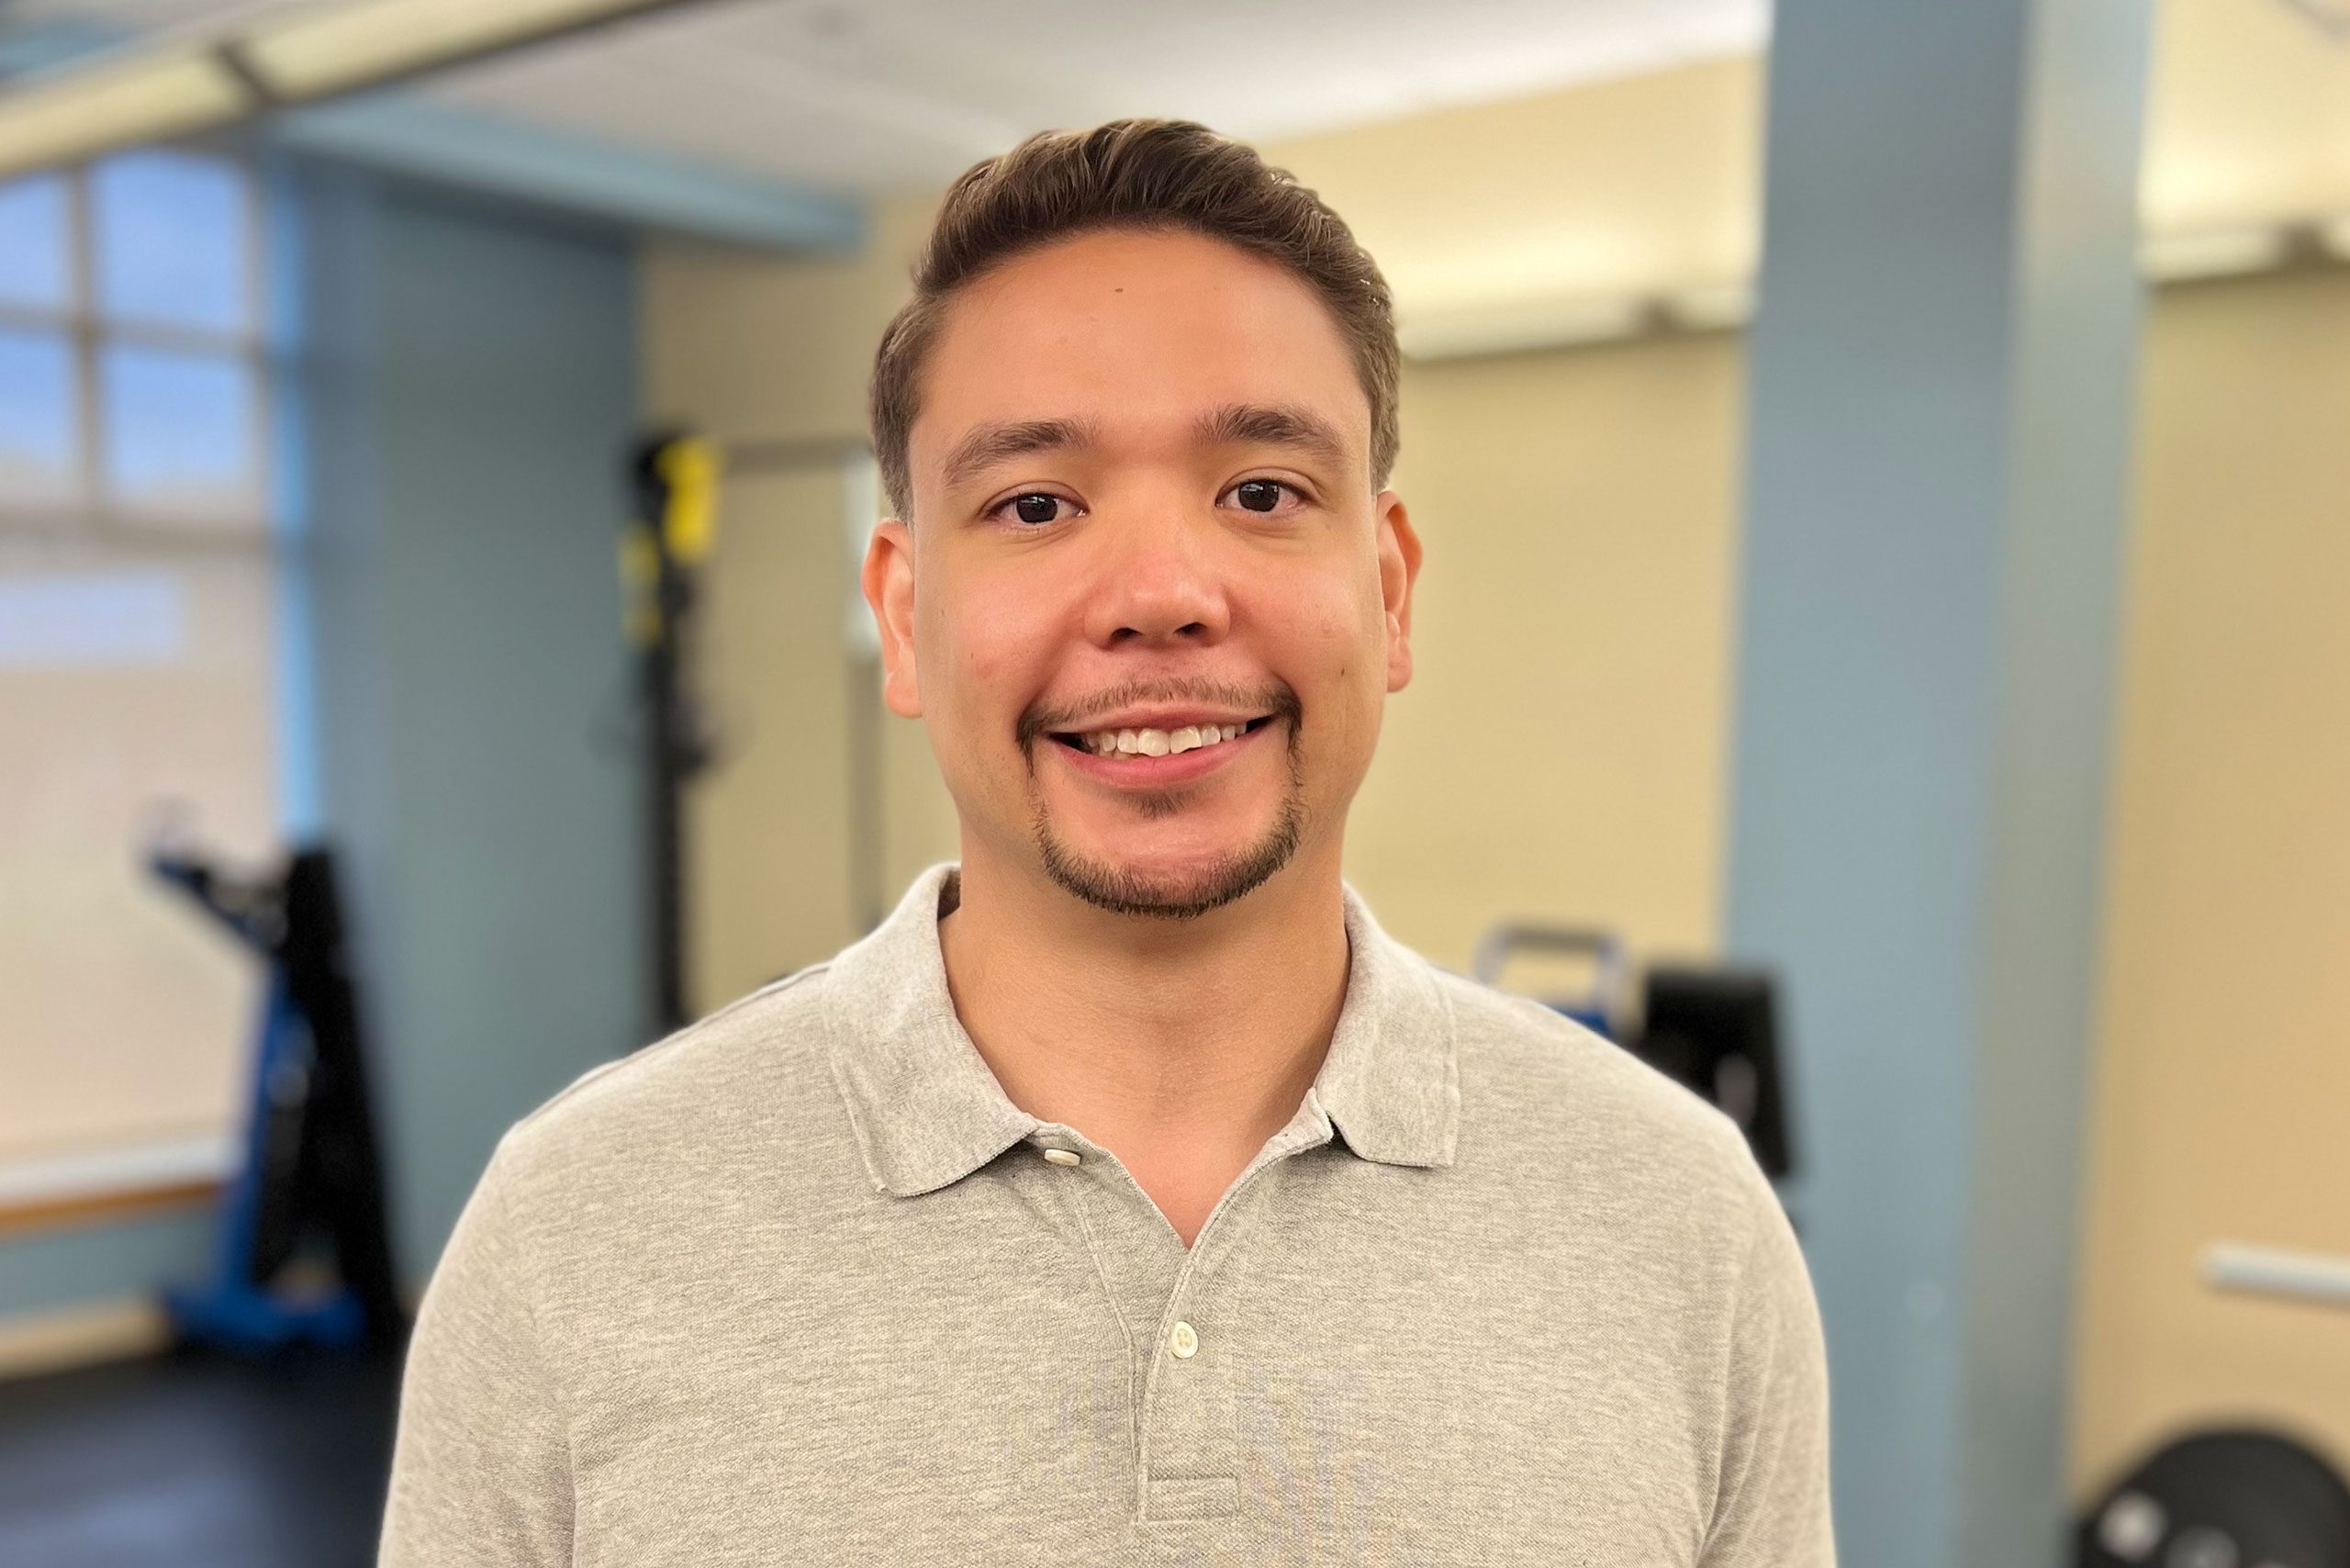 Stephen Reyes - Lourdes Health & Fitness Sports And Physical Performance Program Coordinator